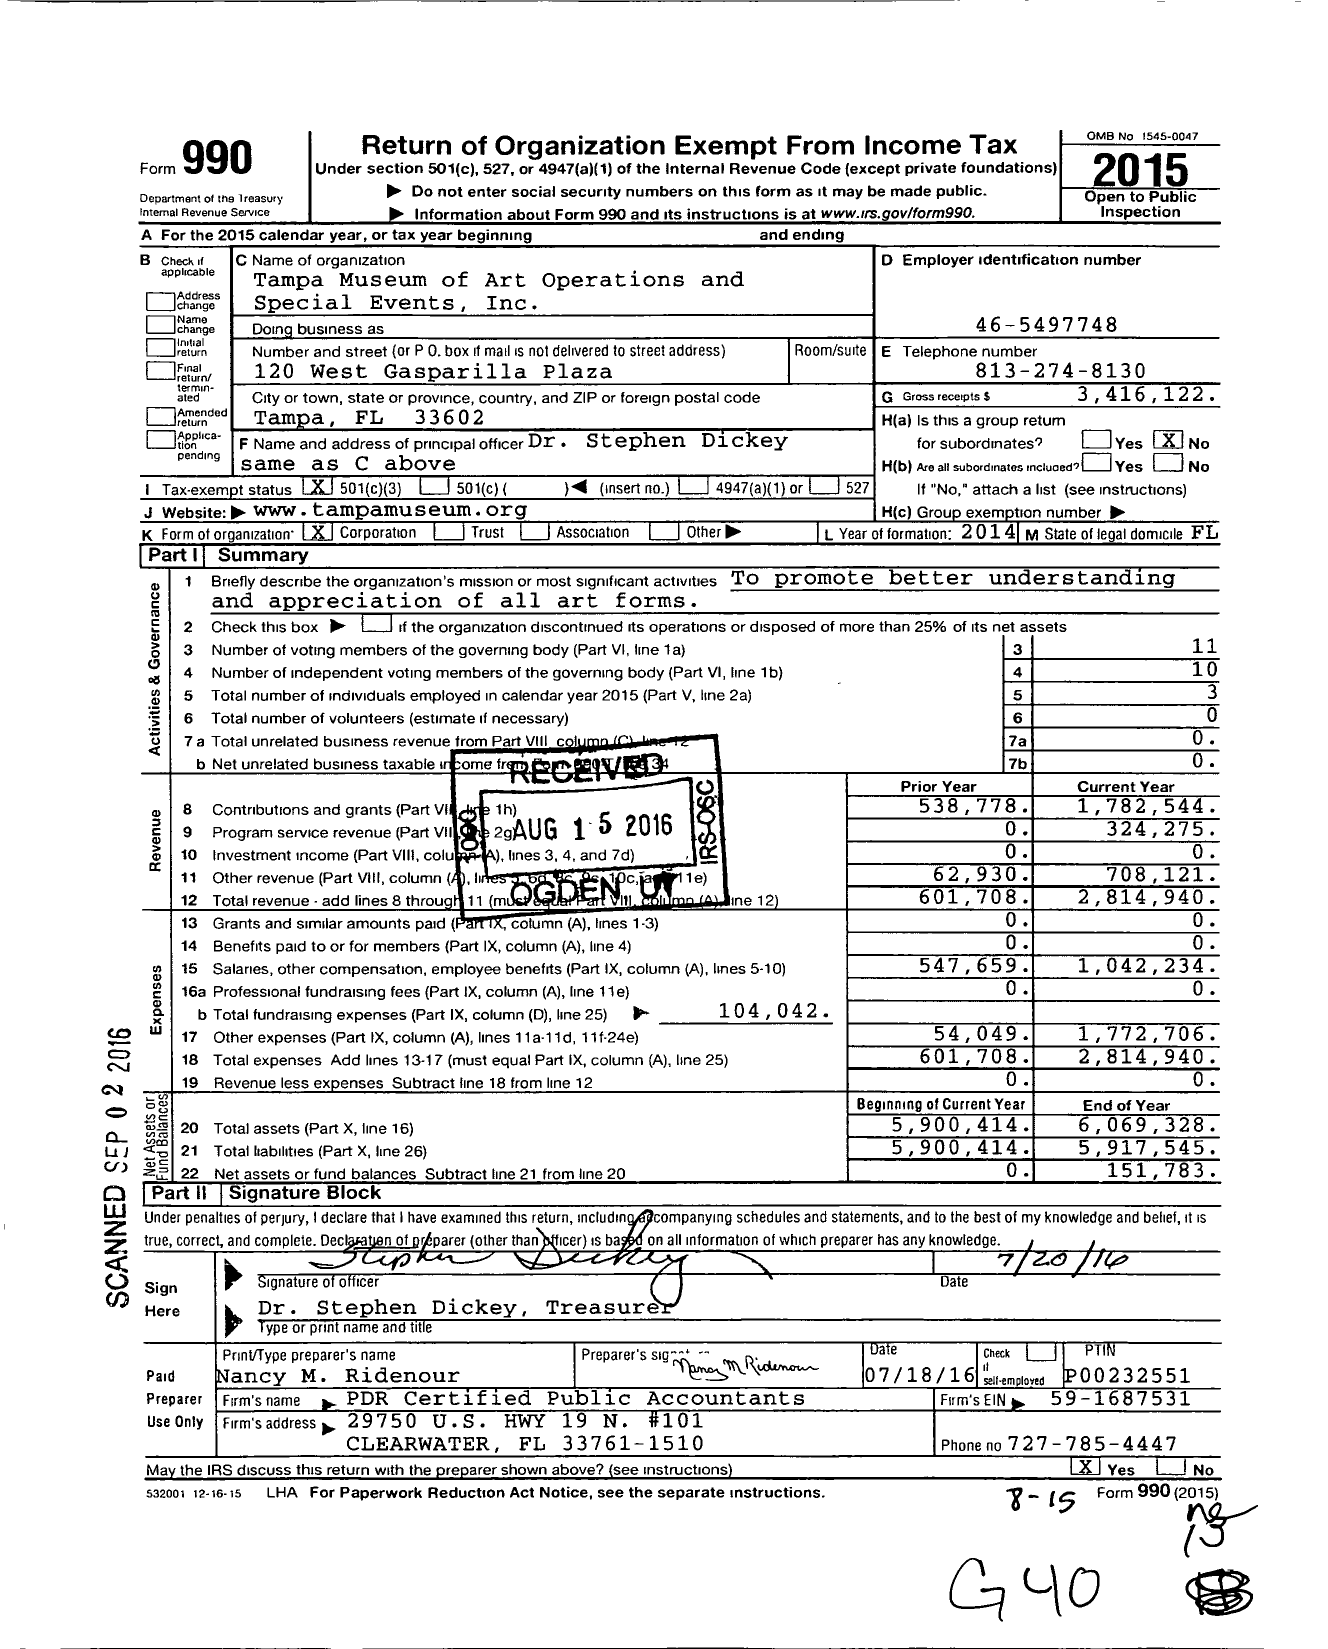 Image of first page of 2015 Form 990 for The Tampa Museum of Art Operations and Special Events